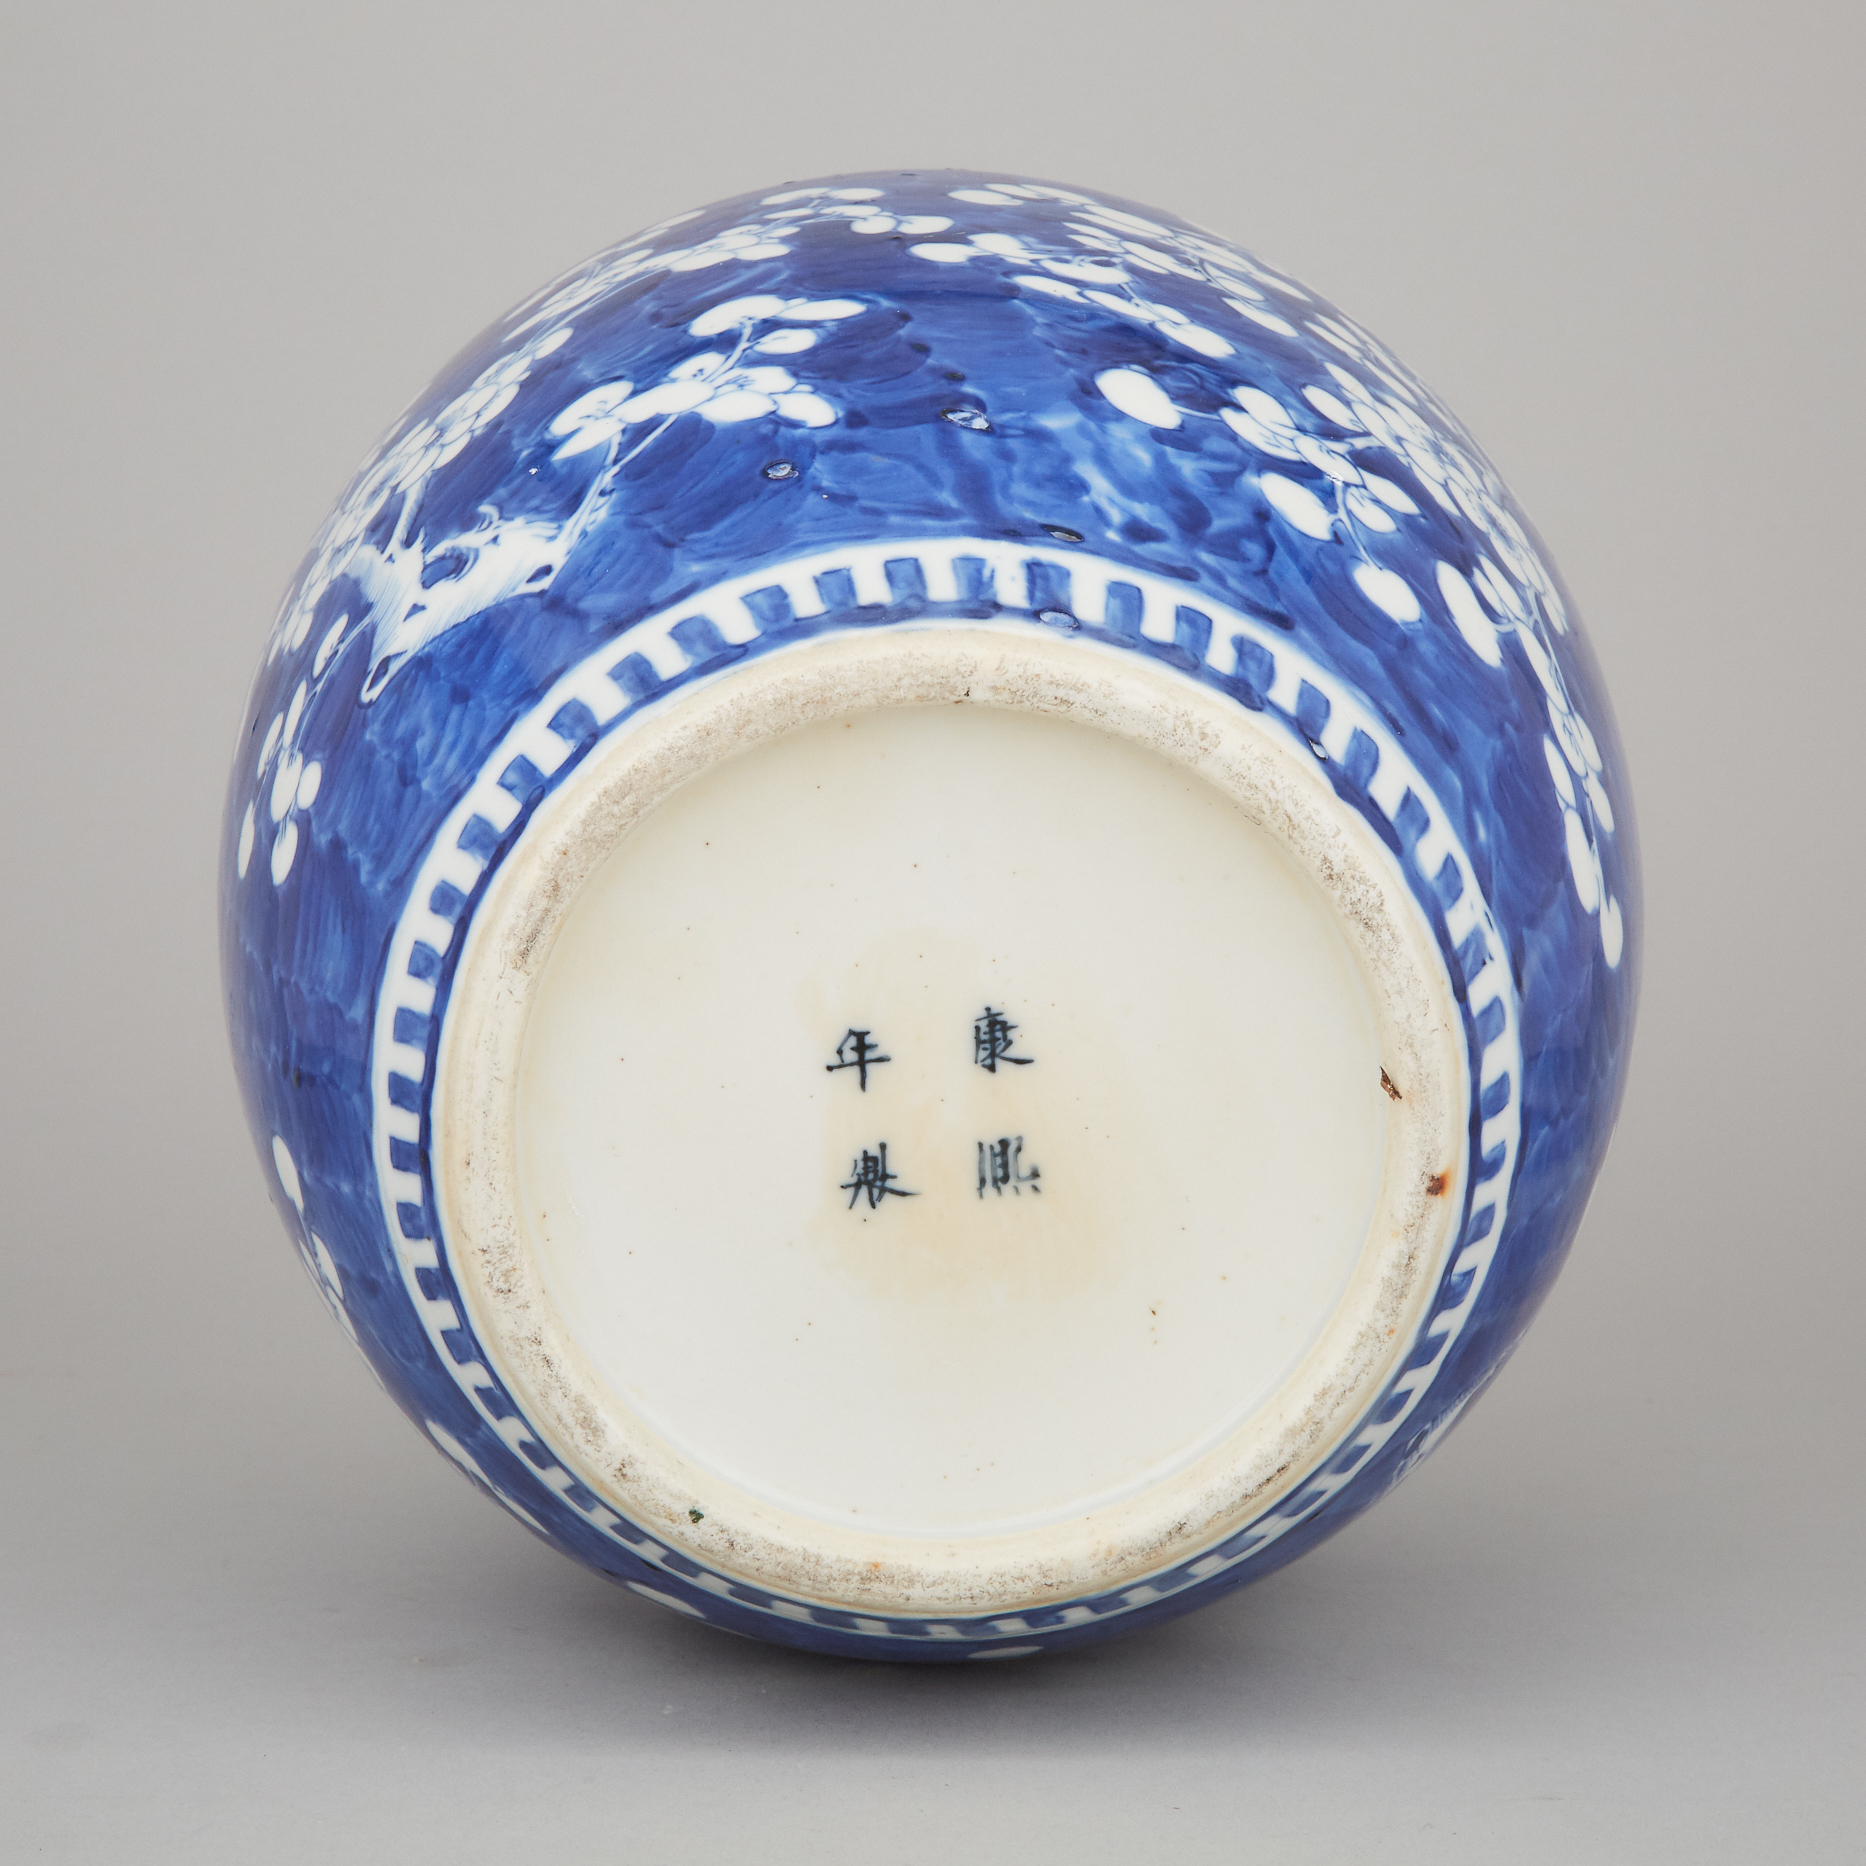 A Blue and White Prunus Ginger Jar and Cover, Late 19th/Early 20th Century